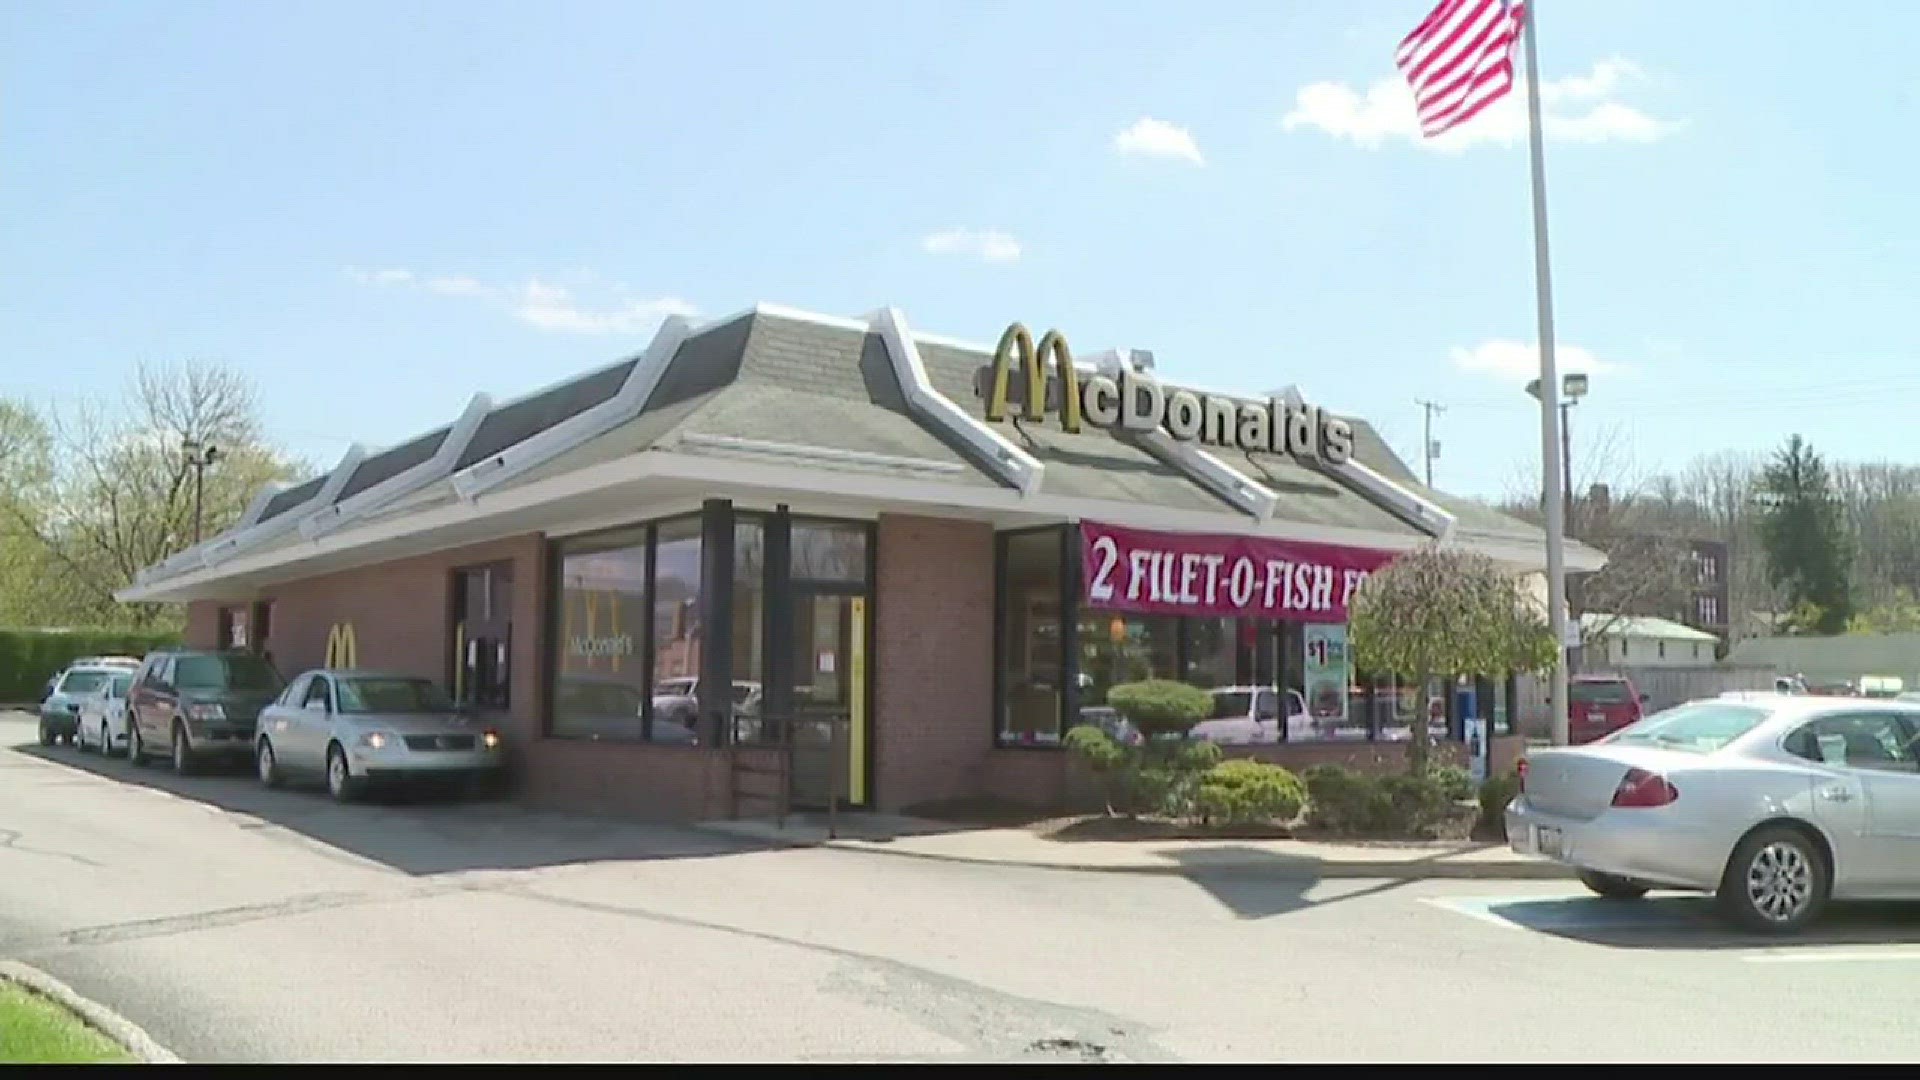 8-year-old boy drives to McDonald's for cheeseburger